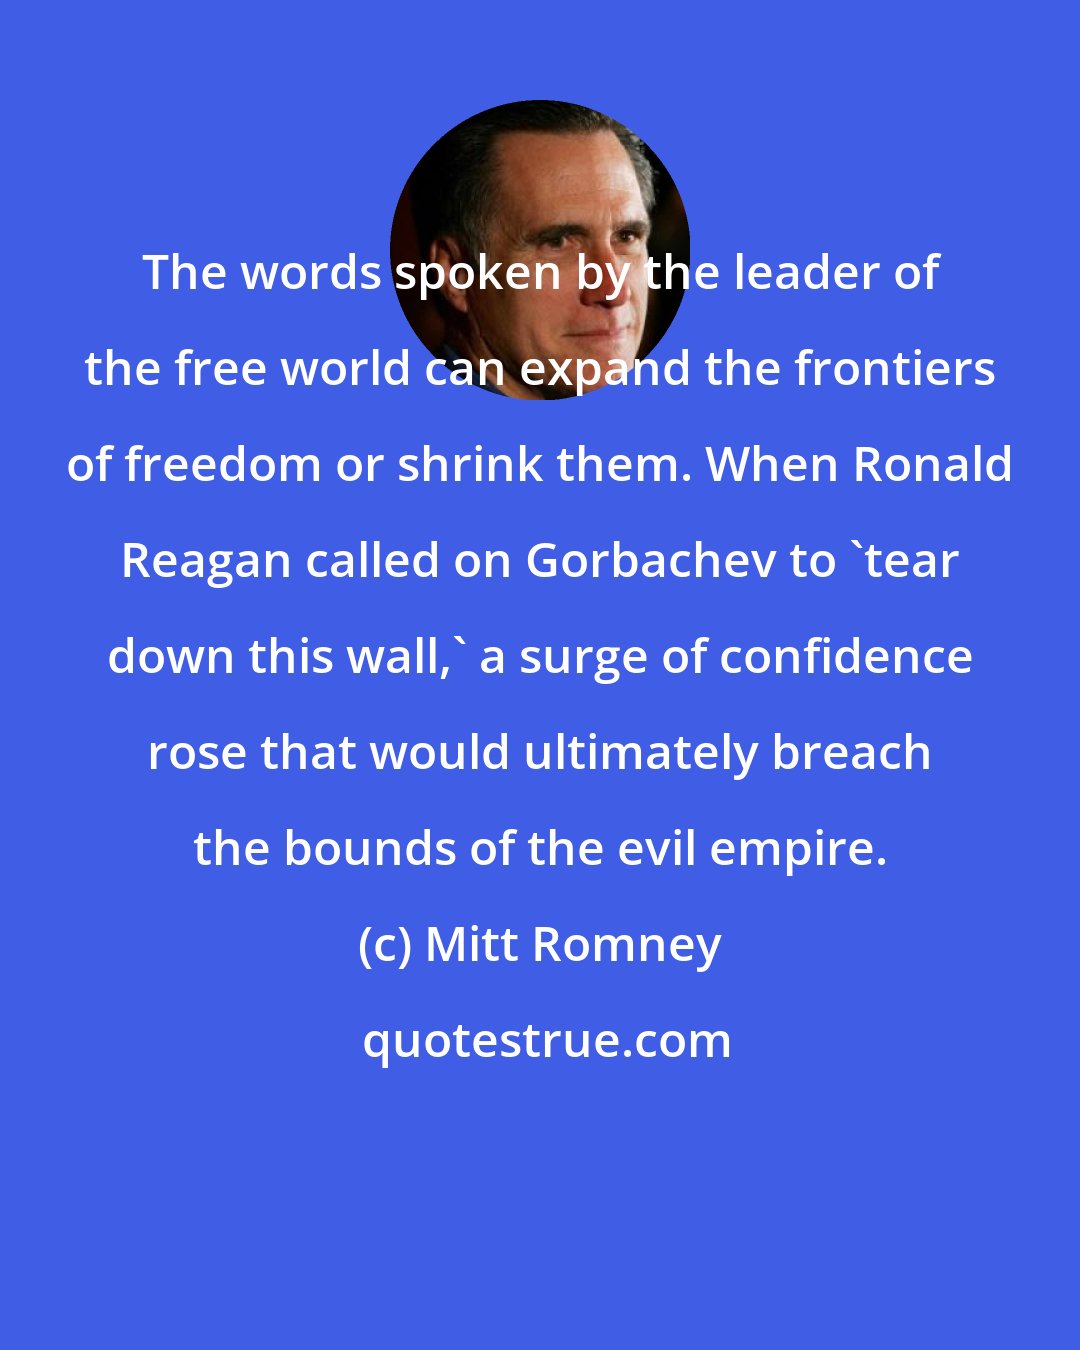 Mitt Romney: The words spoken by the leader of the free world can expand the frontiers of freedom or shrink them. When Ronald Reagan called on Gorbachev to 'tear down this wall,' a surge of confidence rose that would ultimately breach the bounds of the evil empire.